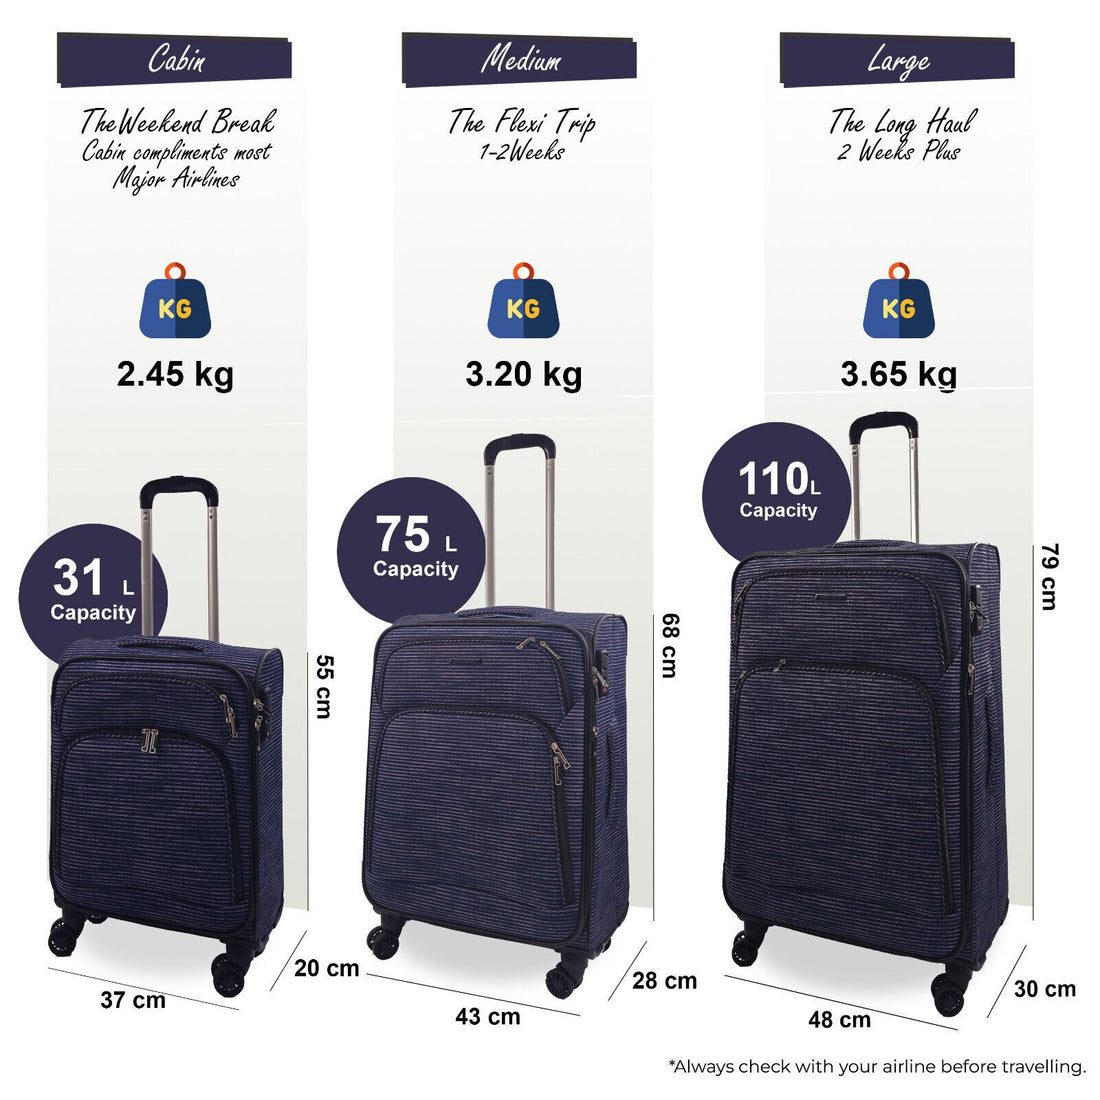 Ashville Set of 3 Soft Shell Suitcase in Lines